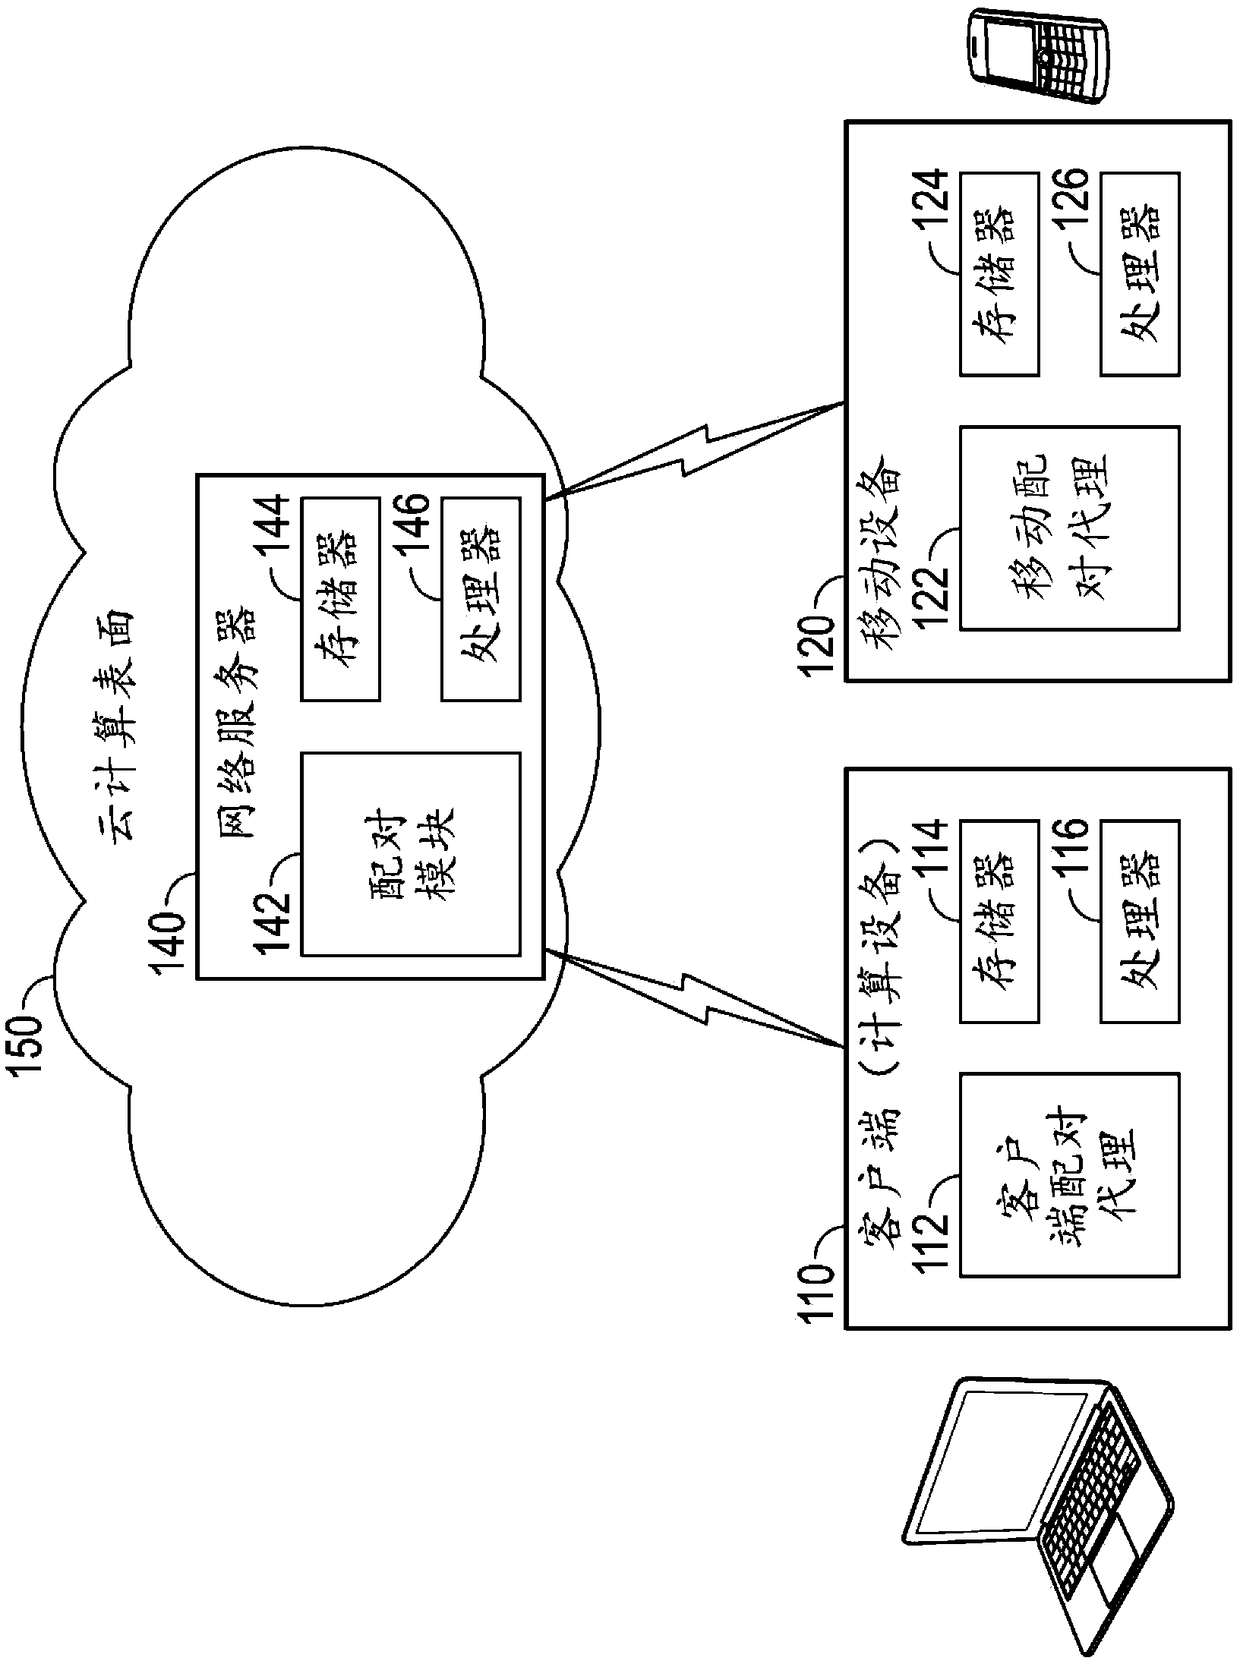 System and method for service assisted mobile pairing of password-less computer login